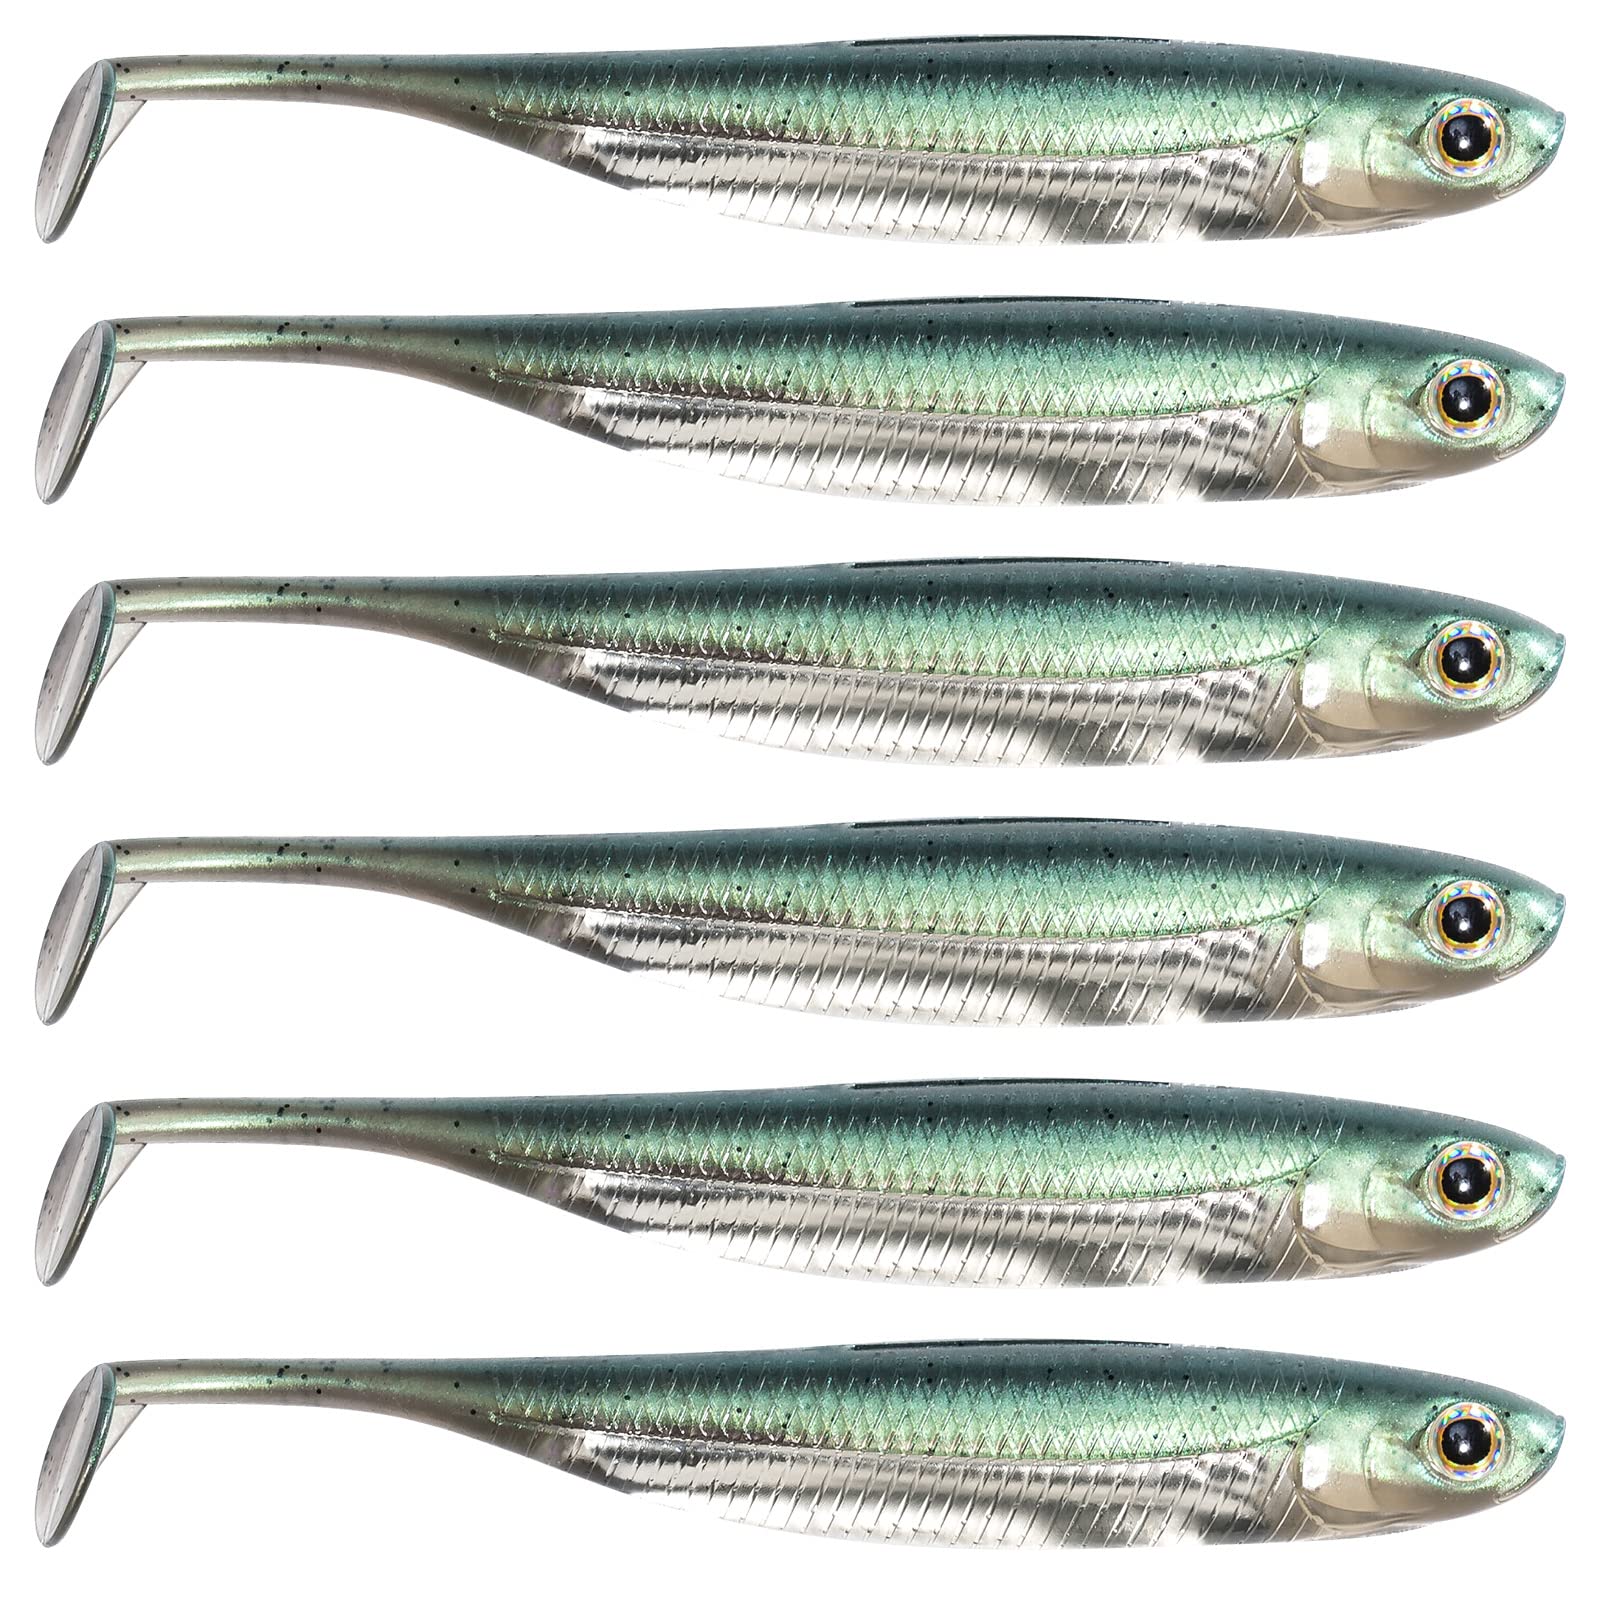 Dr.Fish Paddle Tail Swimbaits Soft Plastic Fishing Lures for Bass